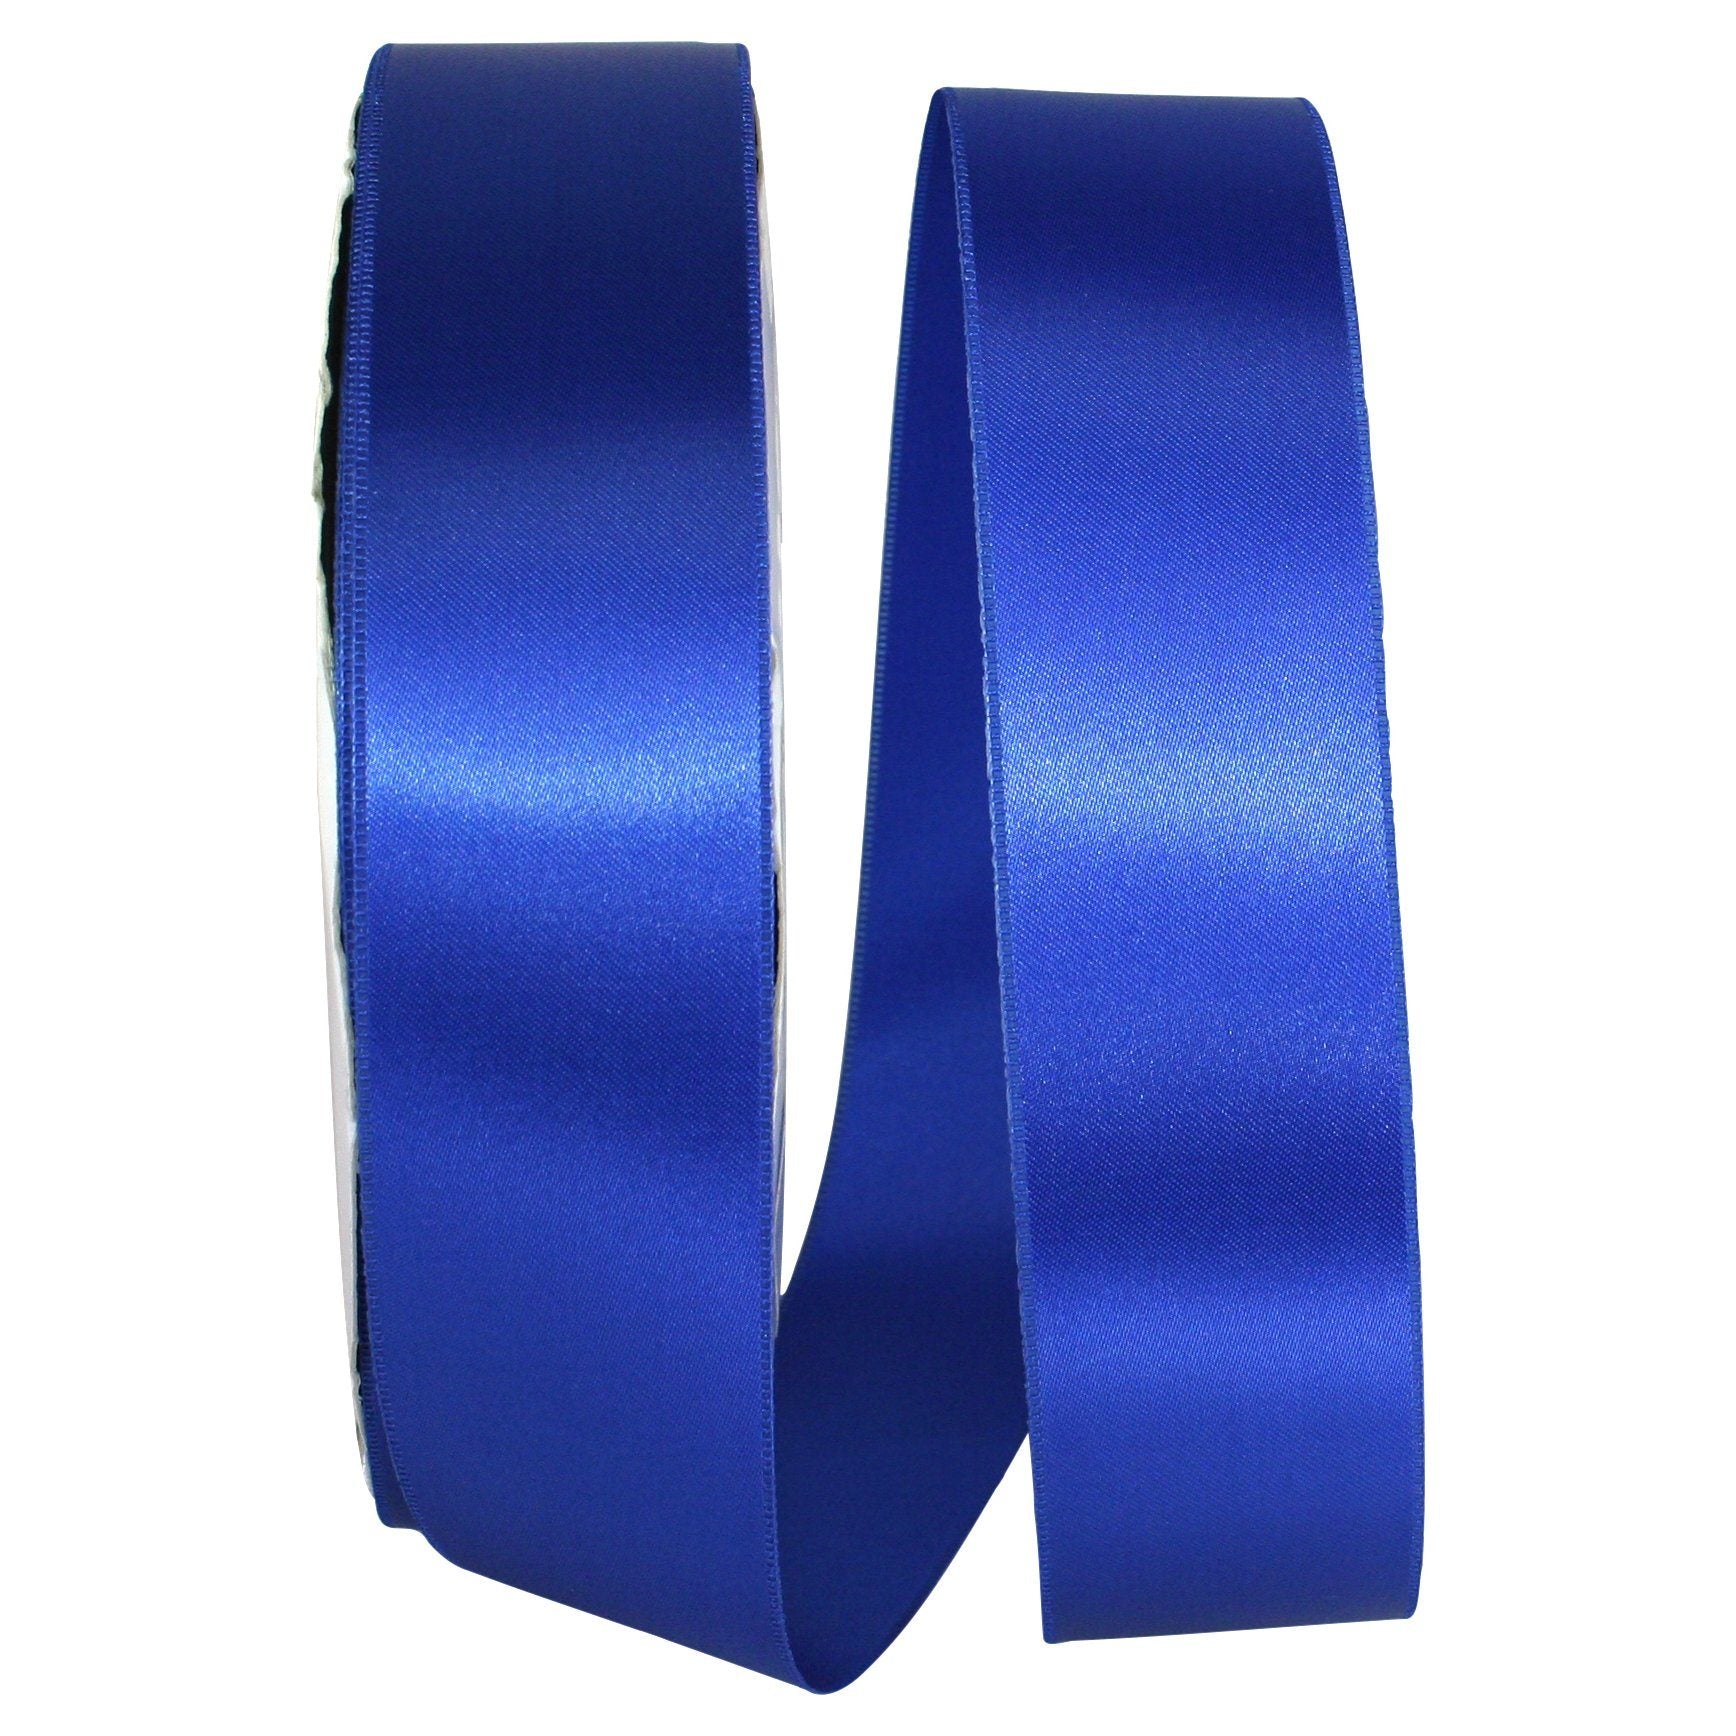 50yds/roll 10mm Organza Royal Blue Ribbon For Gift Wrapping